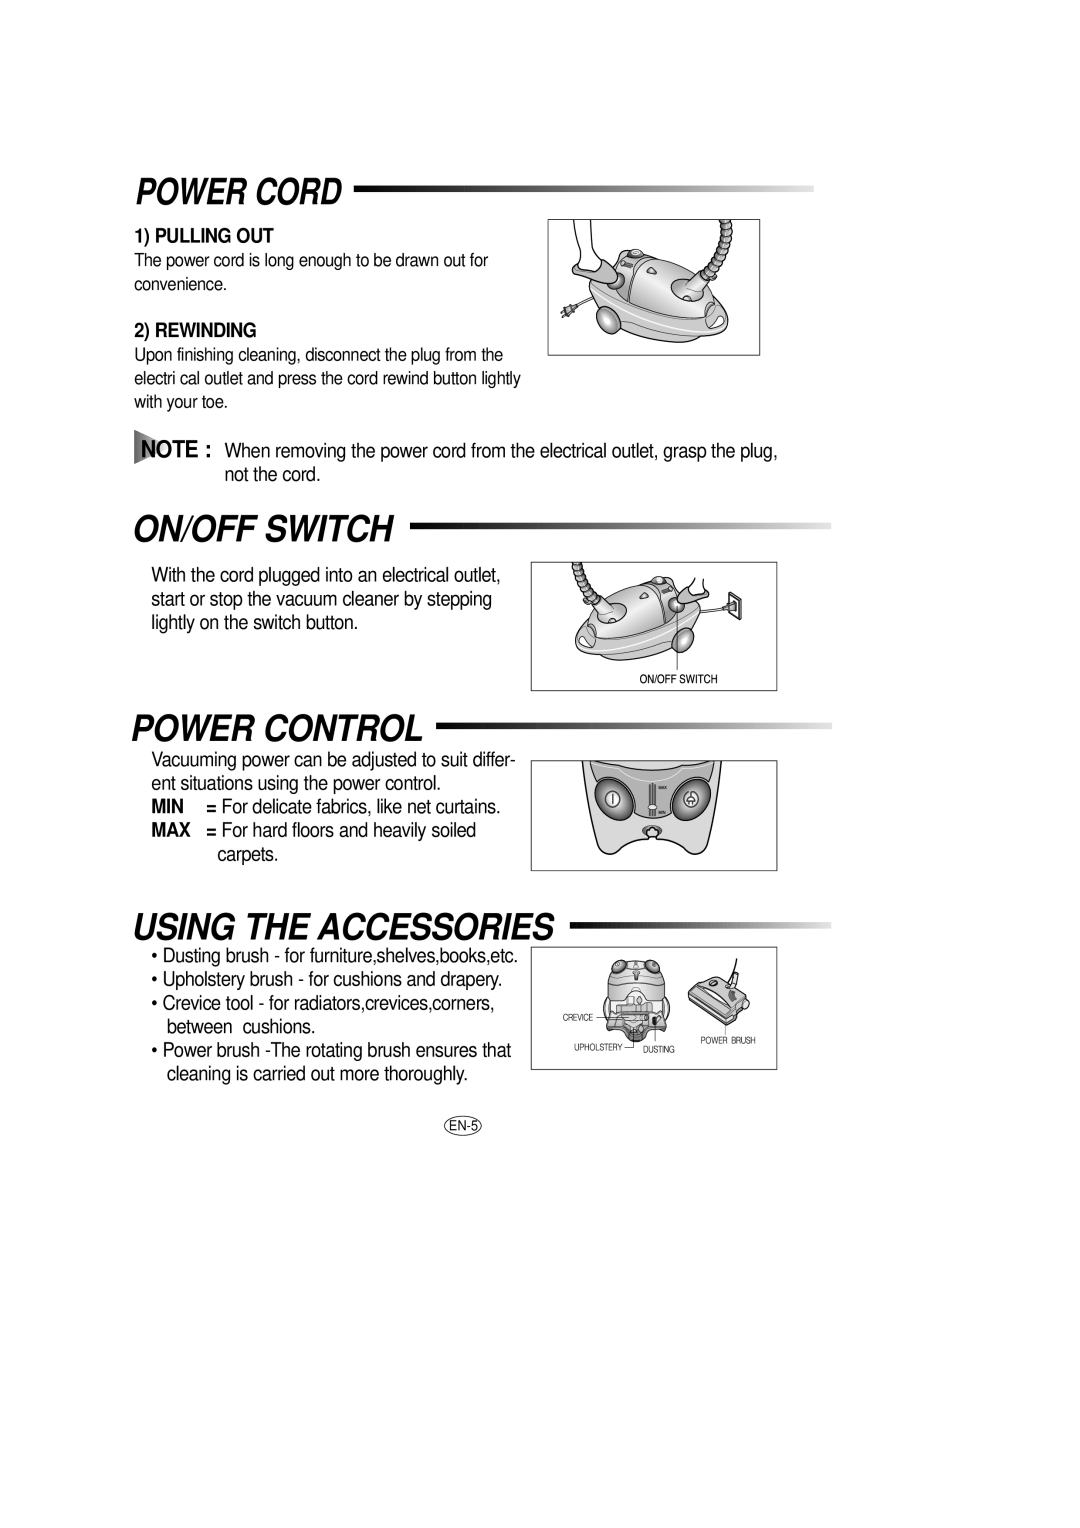 Samsung DJ68-00079J manual Power Cord, On/Off Switch, Power Control, Using The Accessories, Pulling Out, Rewinding, carpets 